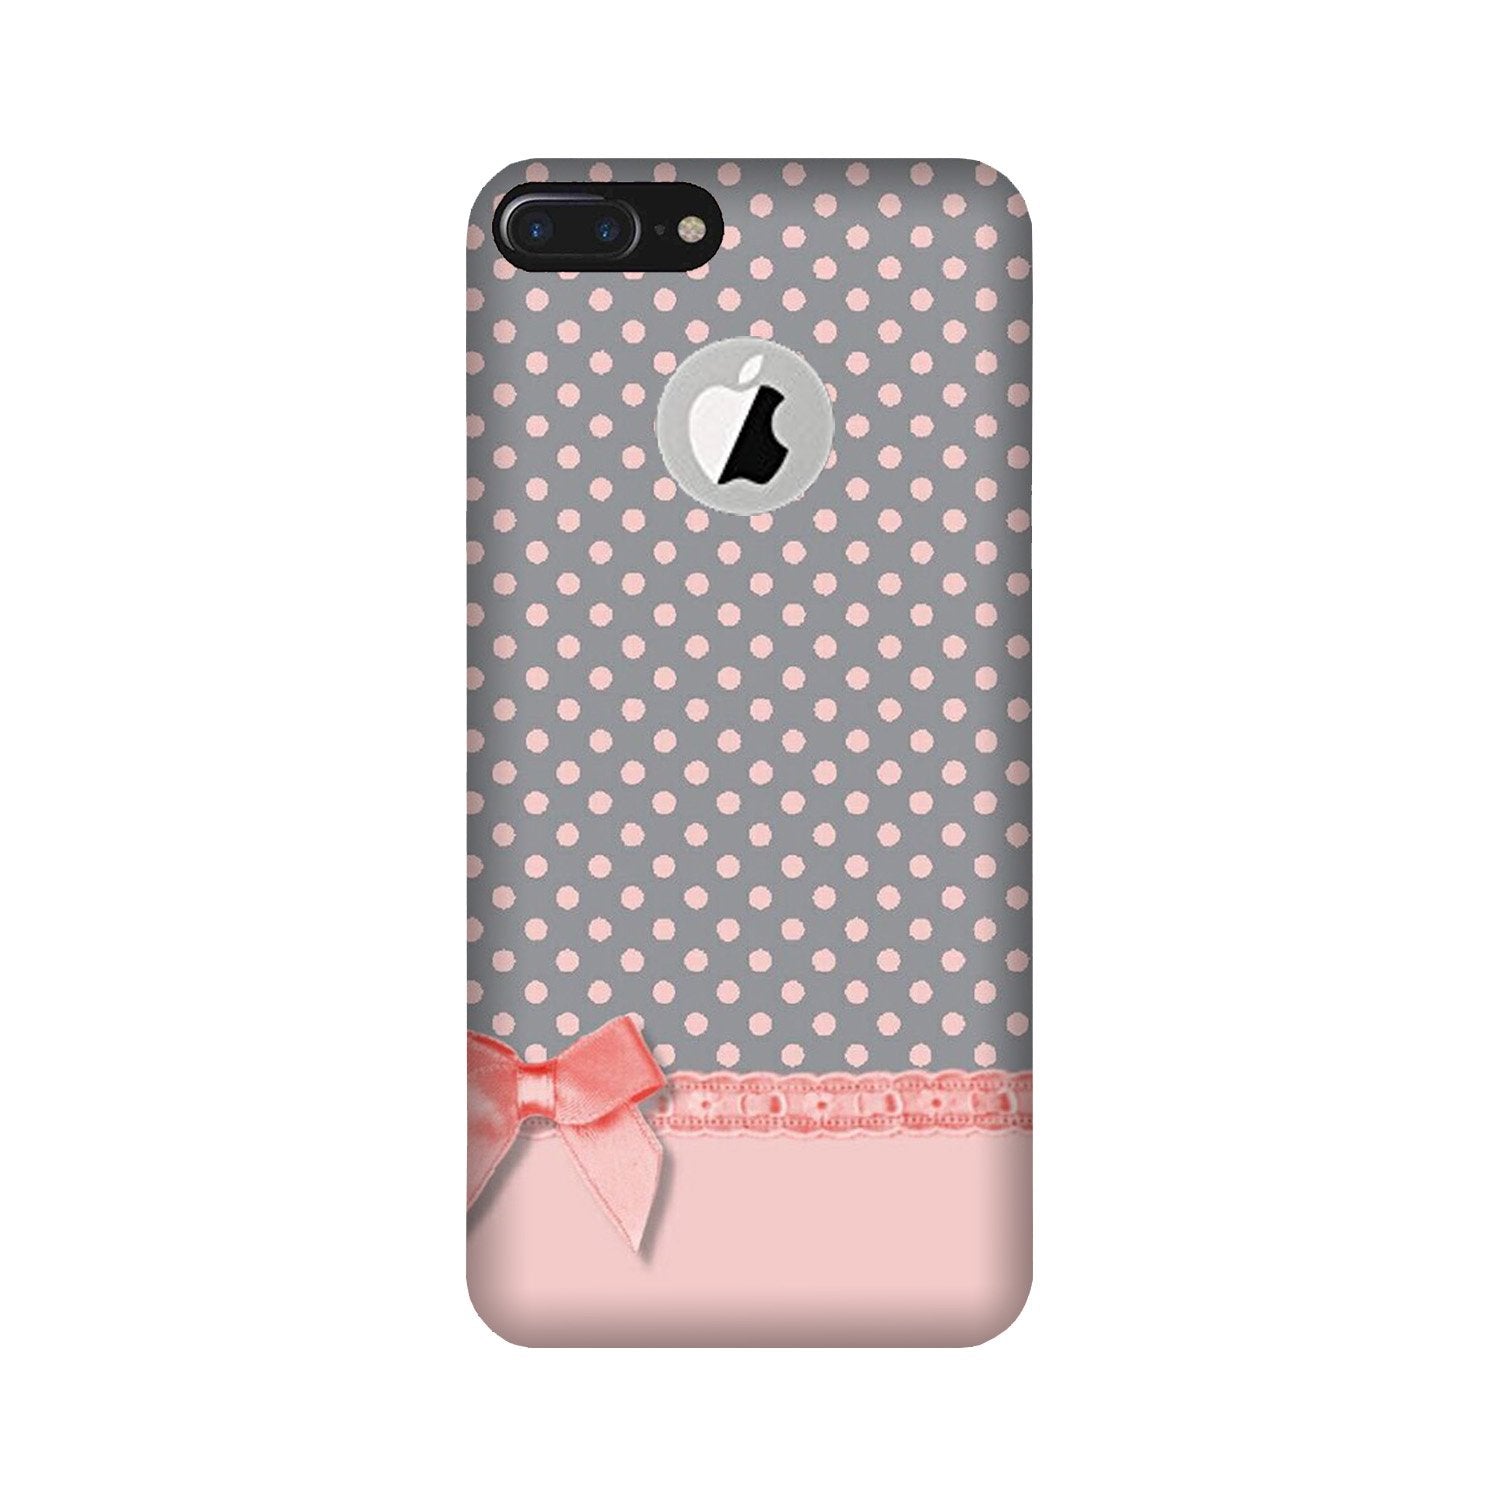 Gift Wrap2 Case for iPhone 7 Plus logo cut